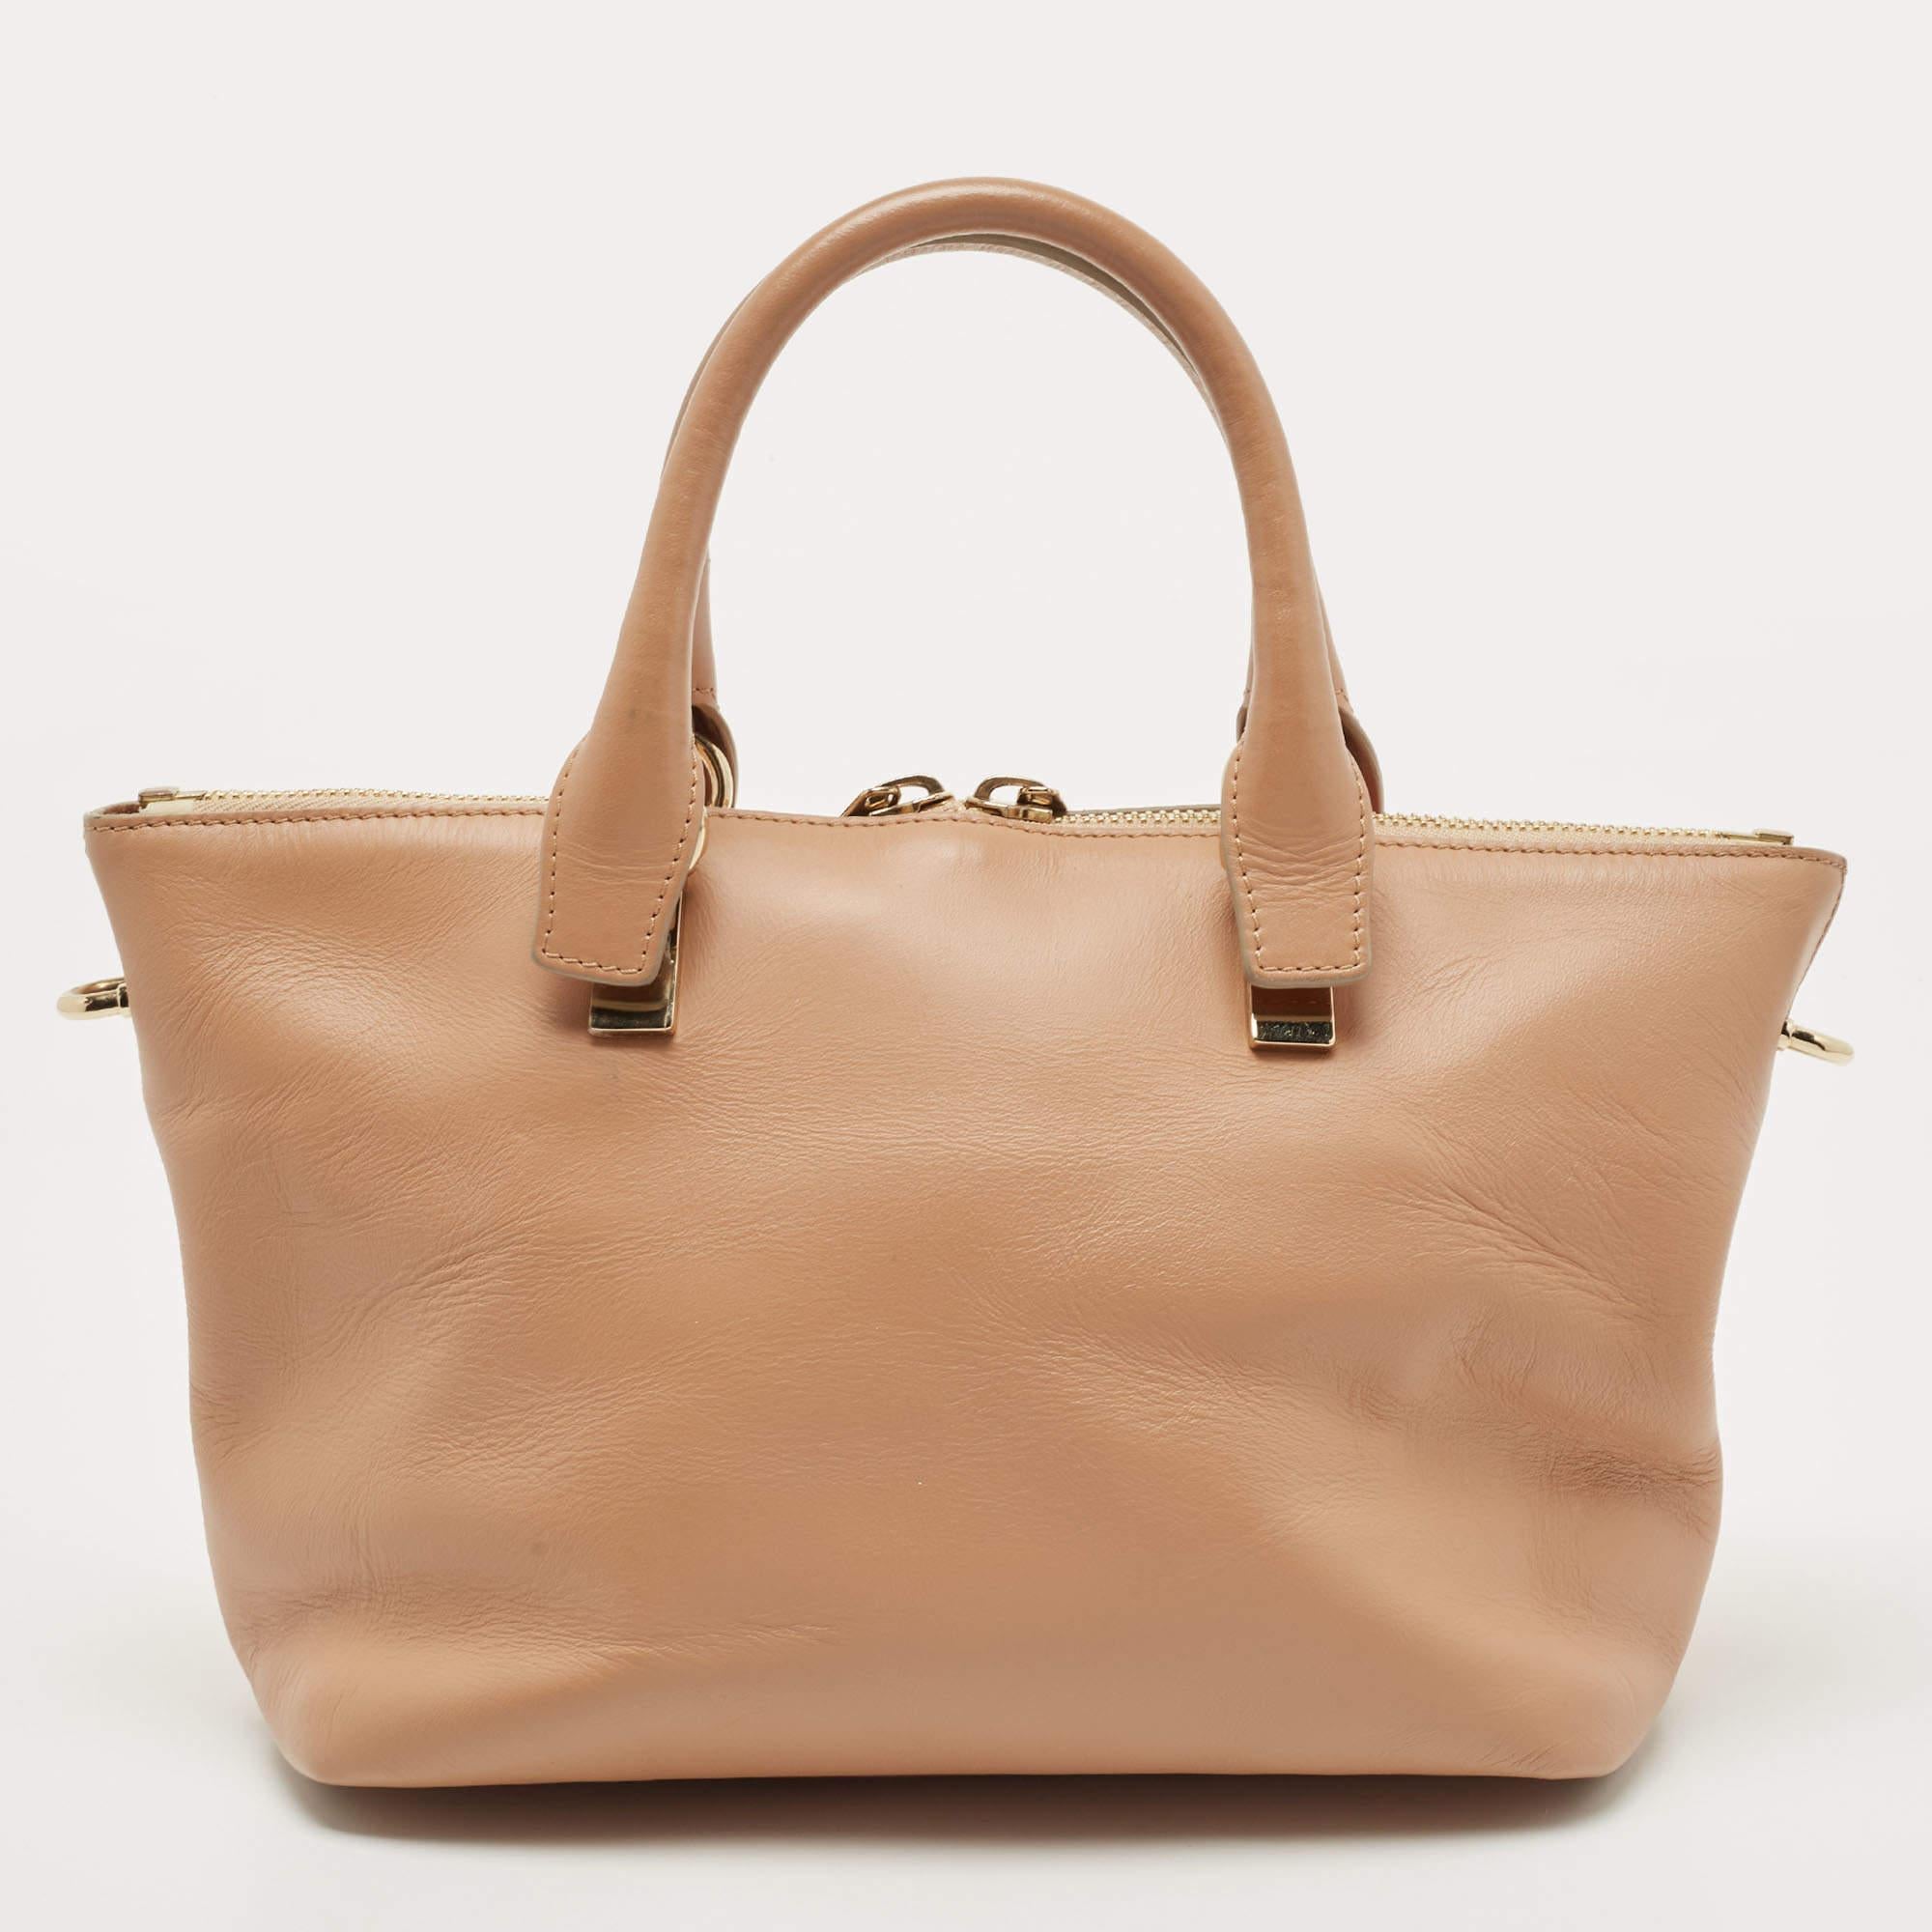 A classic handbag comes with the promise of enduring appeal, boosting your style time and again. This designer bag is one such creation. It’s a fine purchase.

